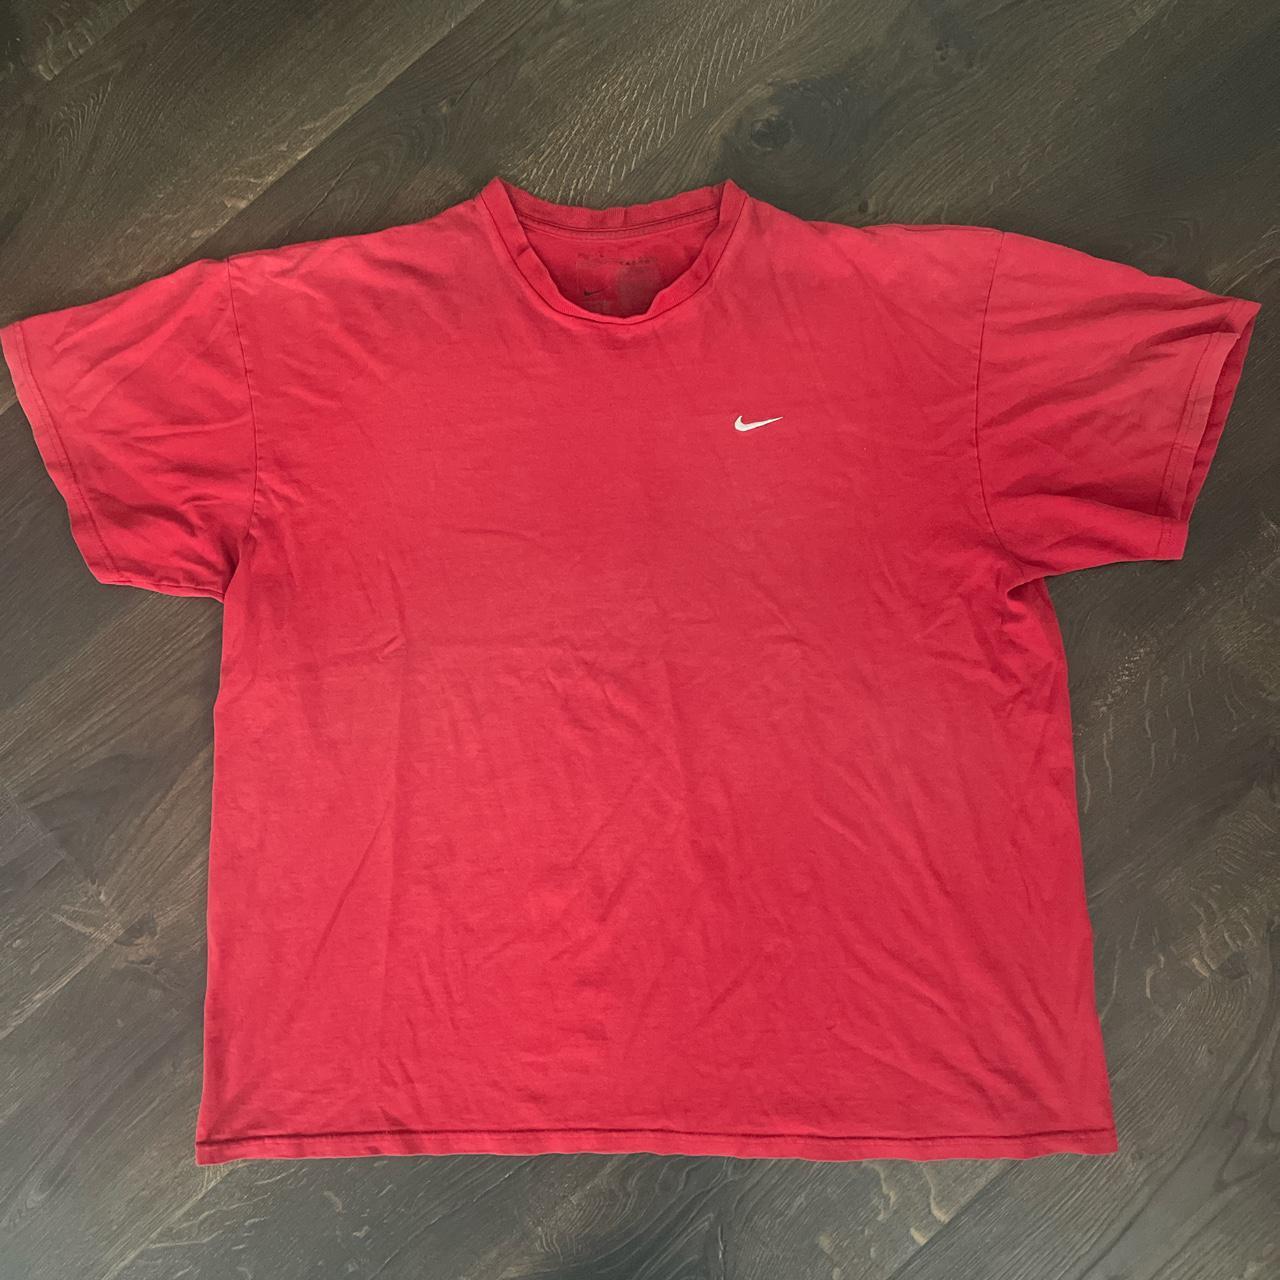 Nike Swoosh Red Shirt. Size XL. Light stains as... - Depop